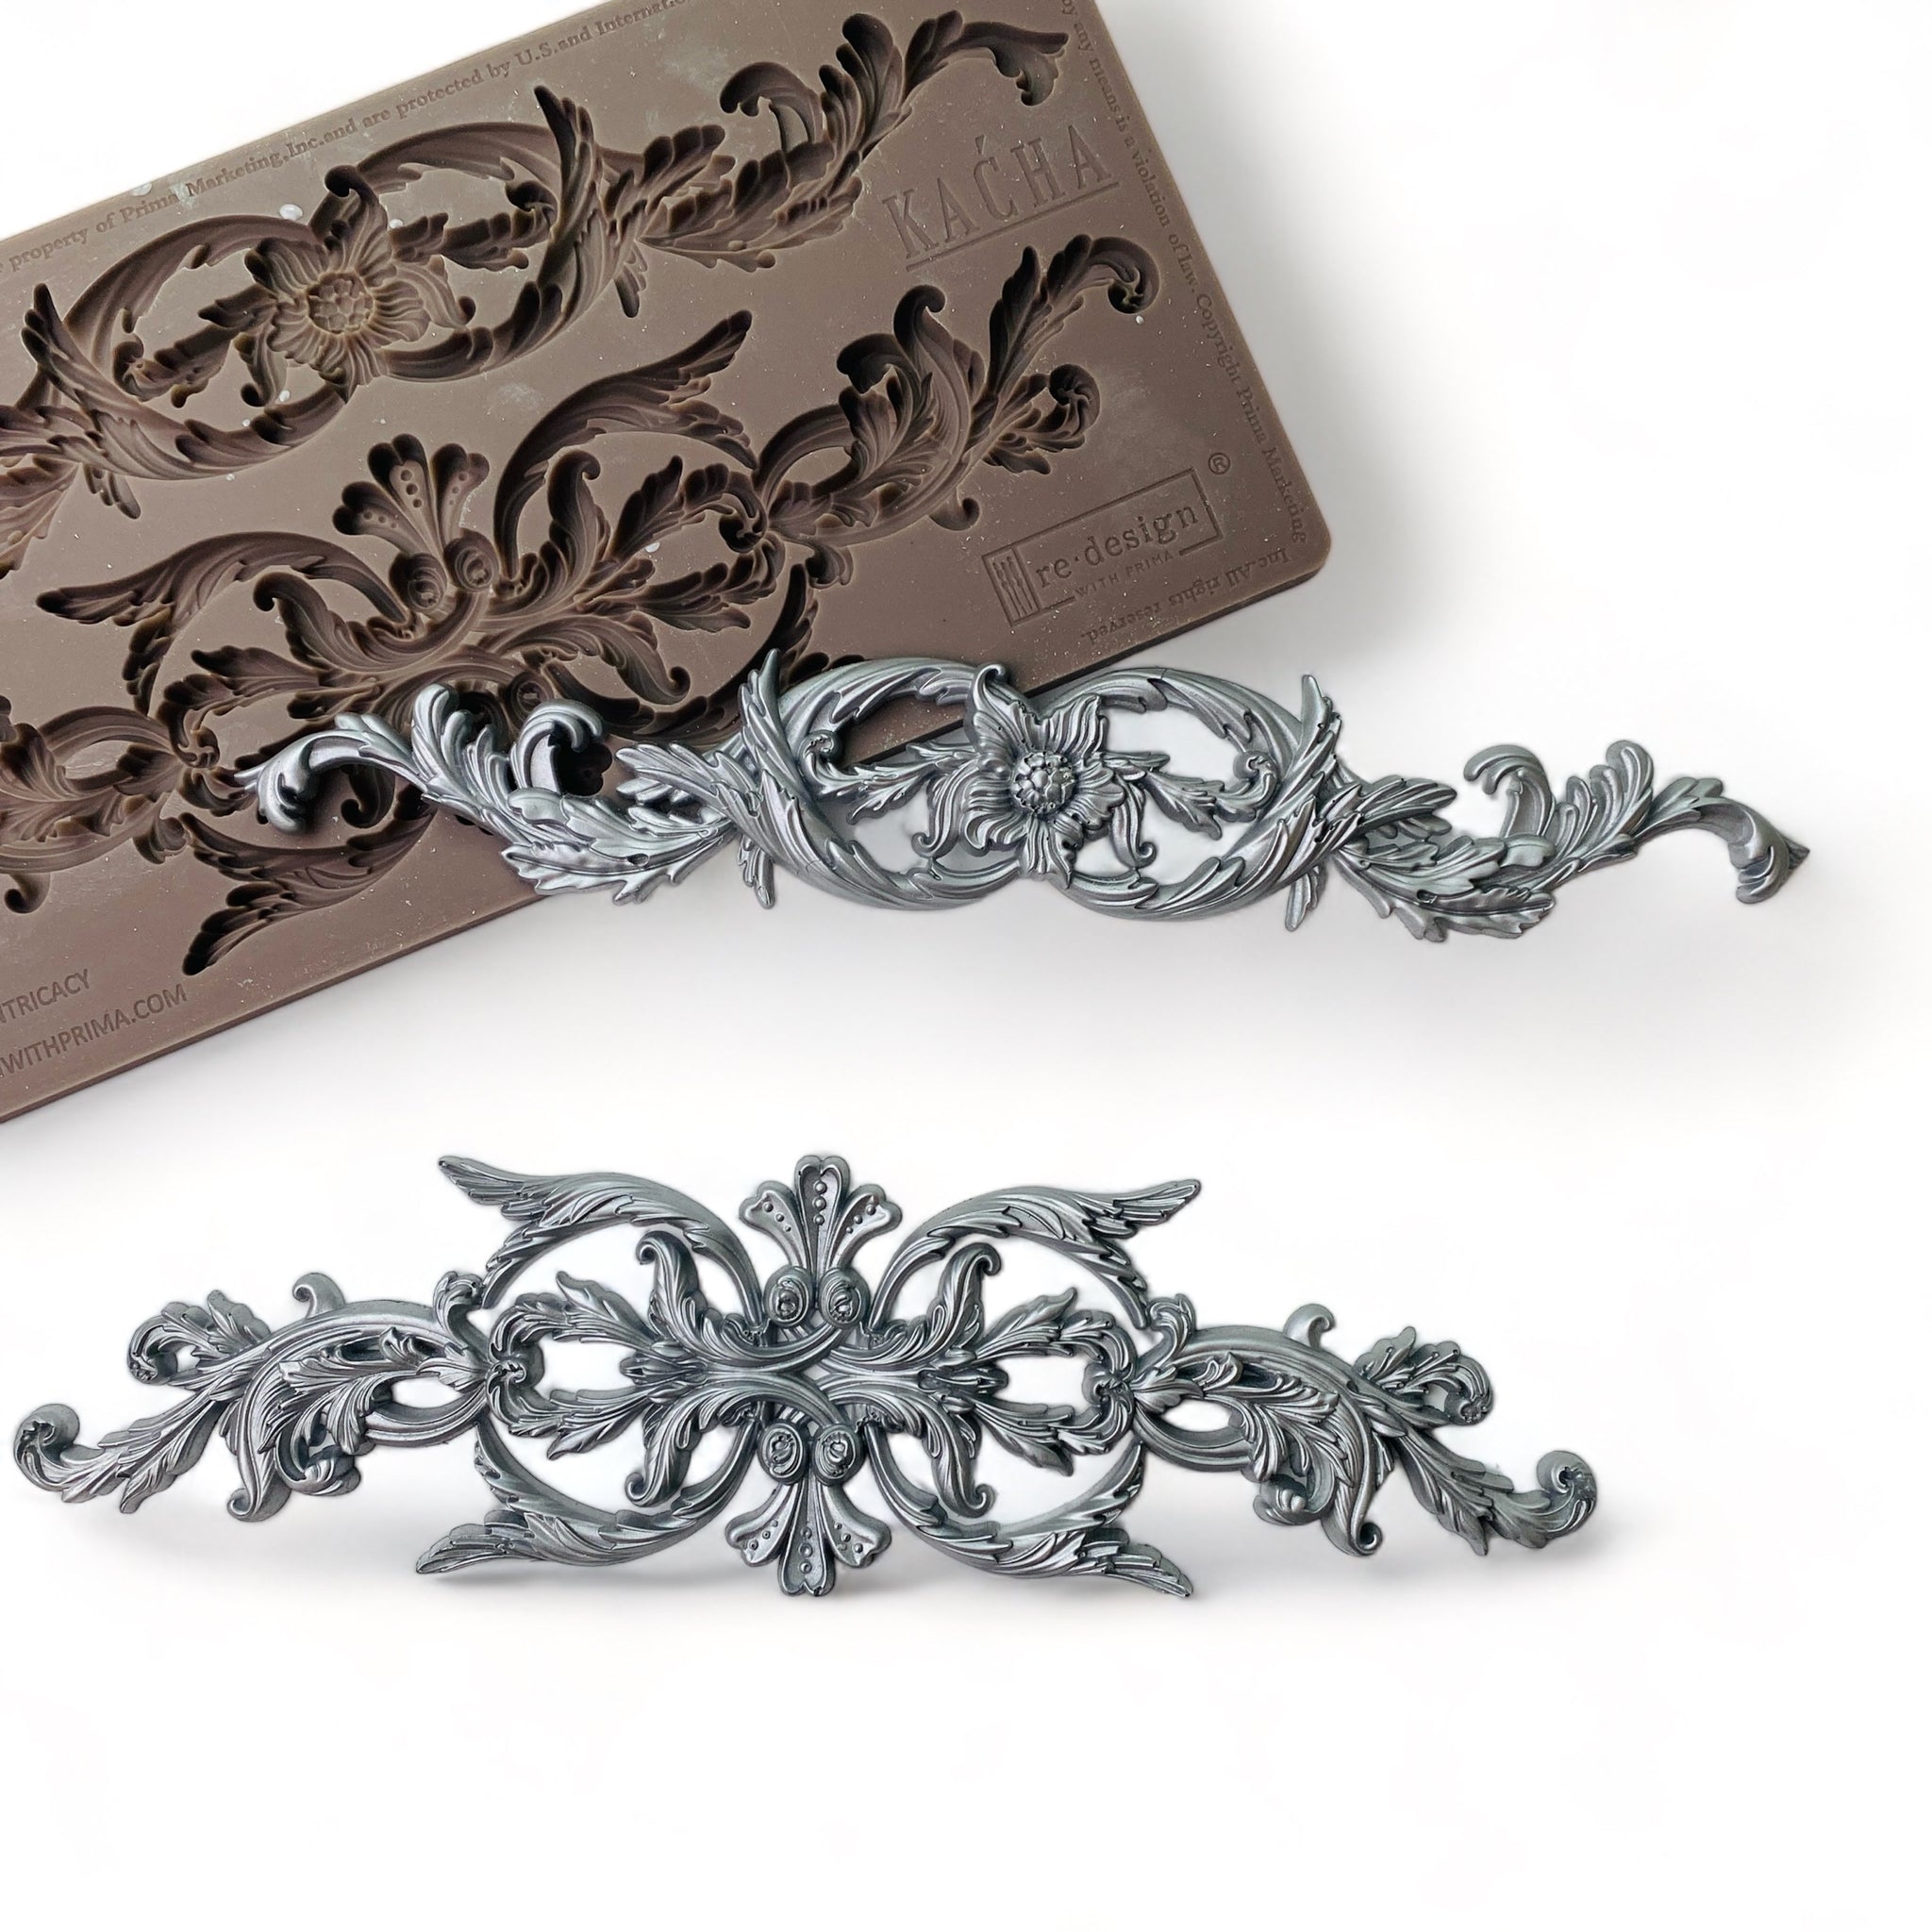 A brown silicone mold and silver colored castings of 2 ornate scrolls are against a white background.